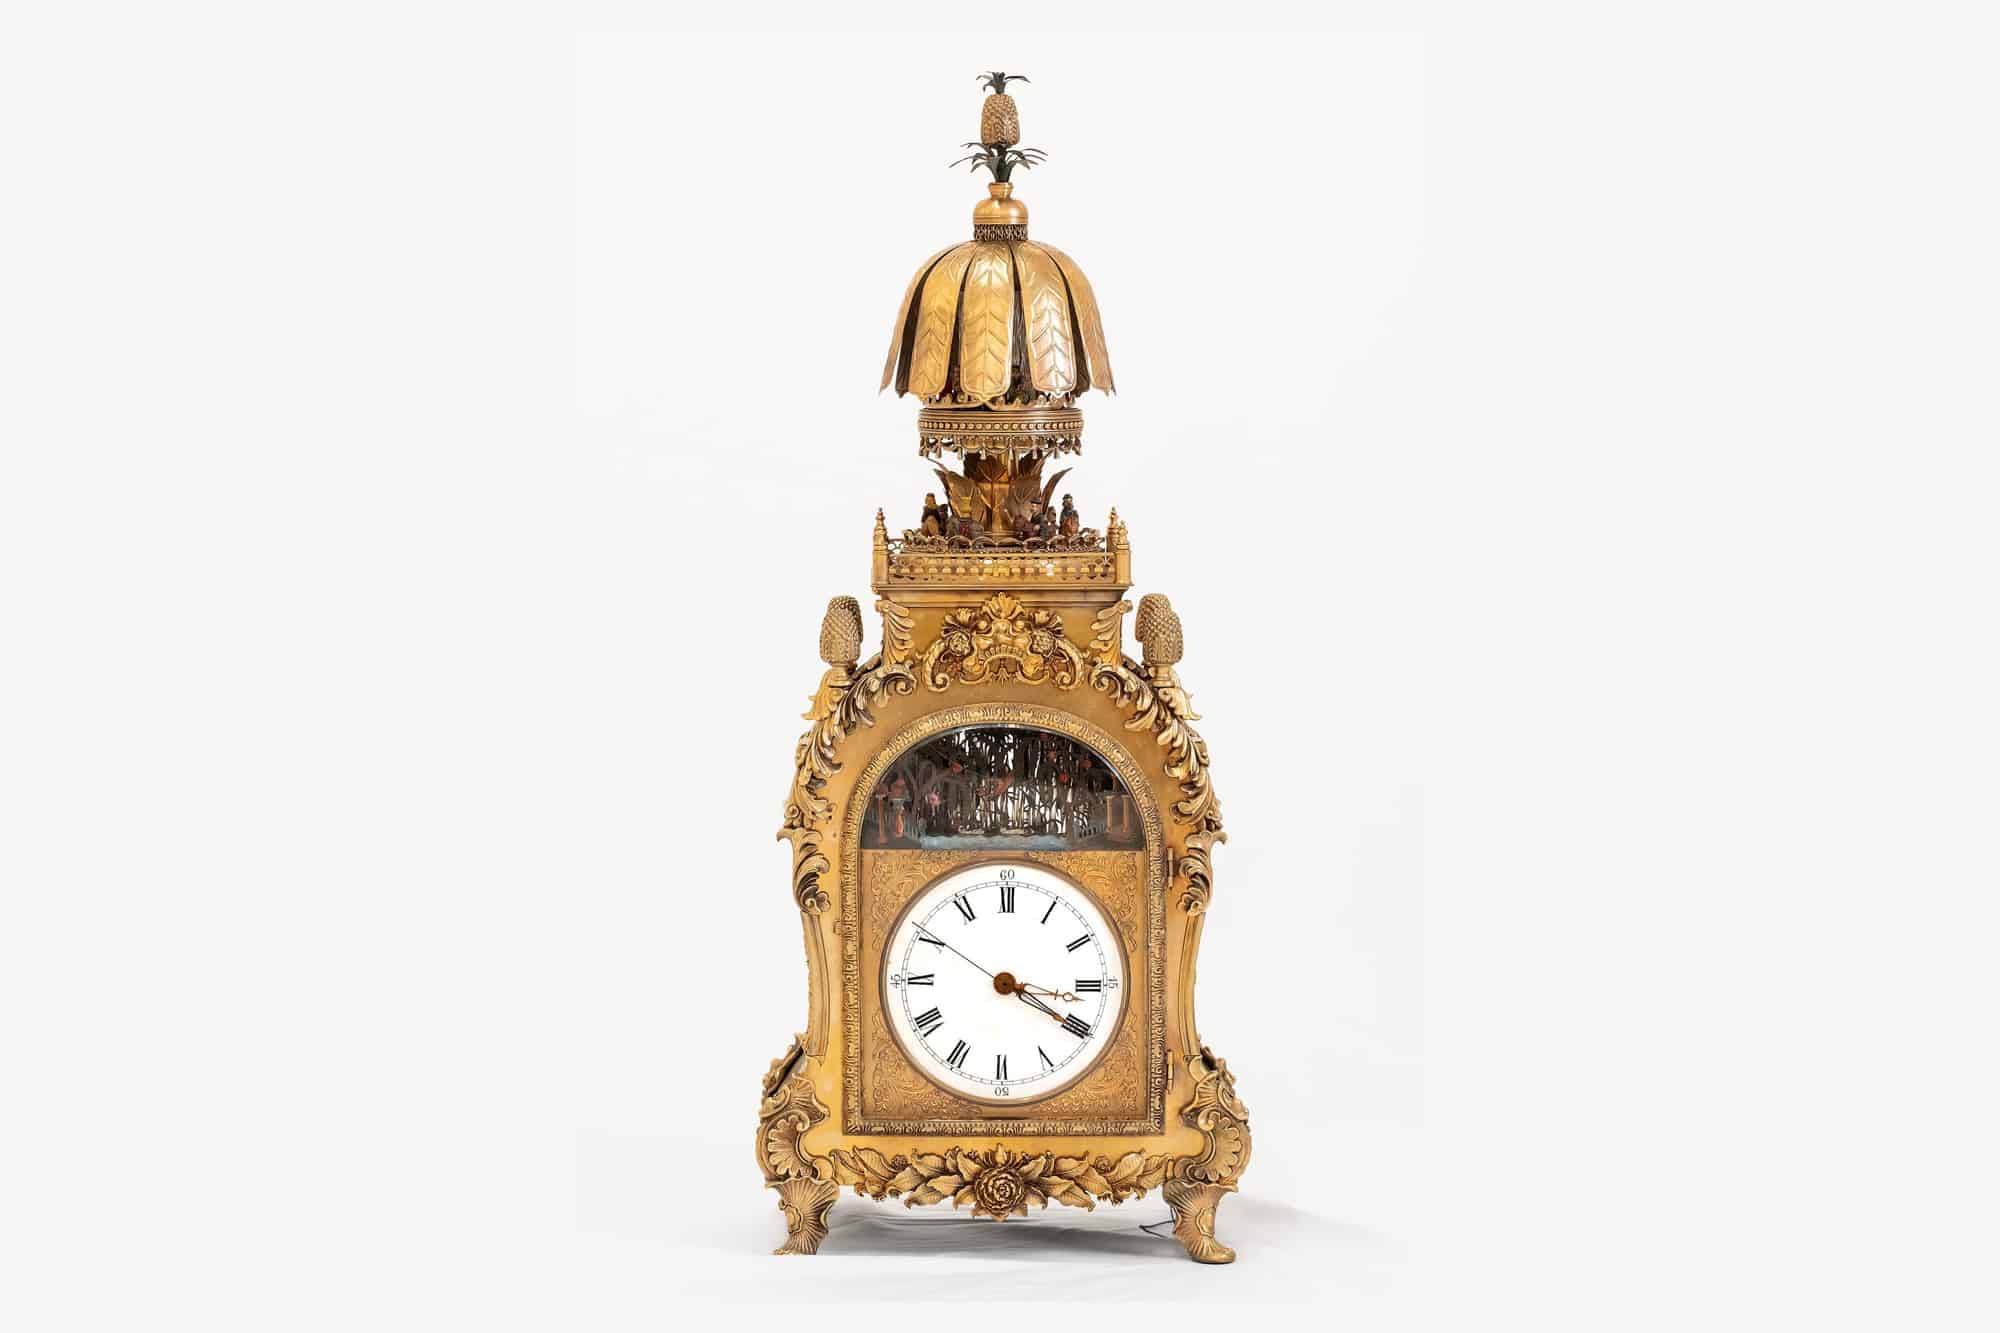 Around the Web: They Look Like the Emperors? Clocks. But Are They Real"